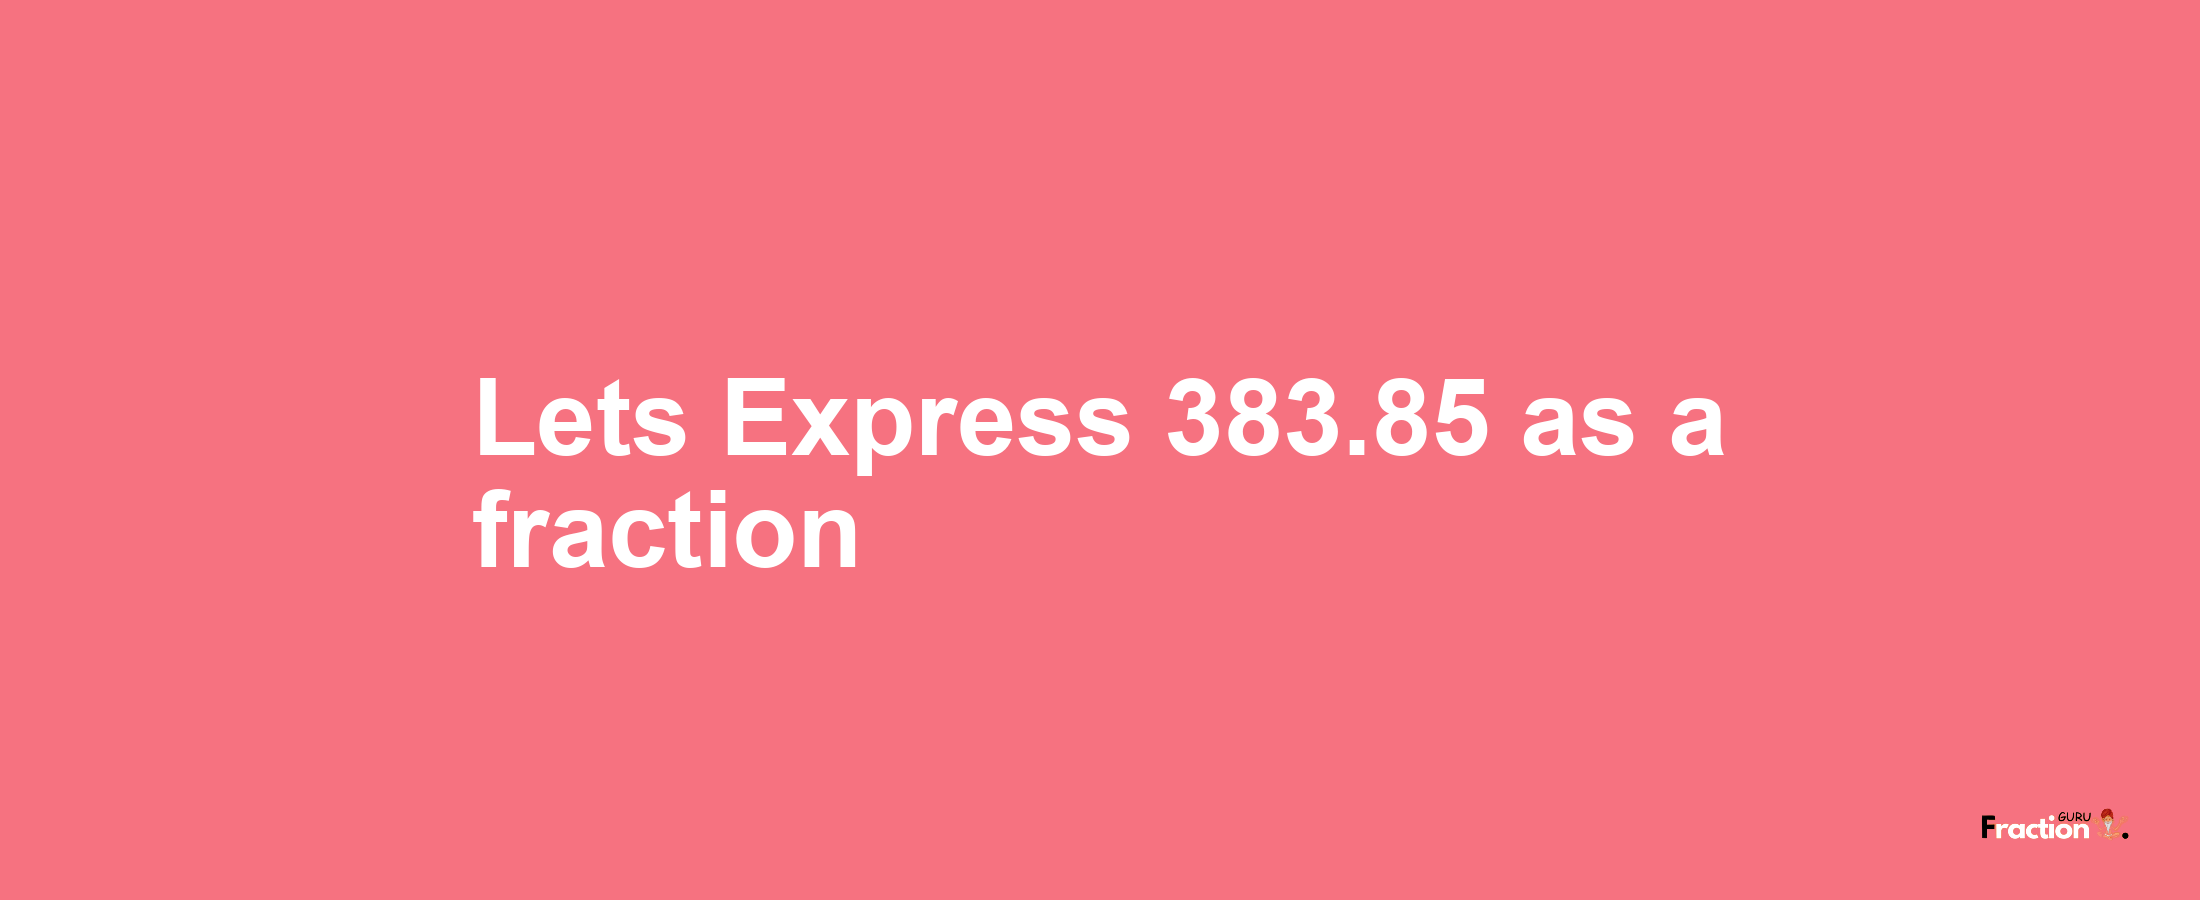 Lets Express 383.85 as afraction